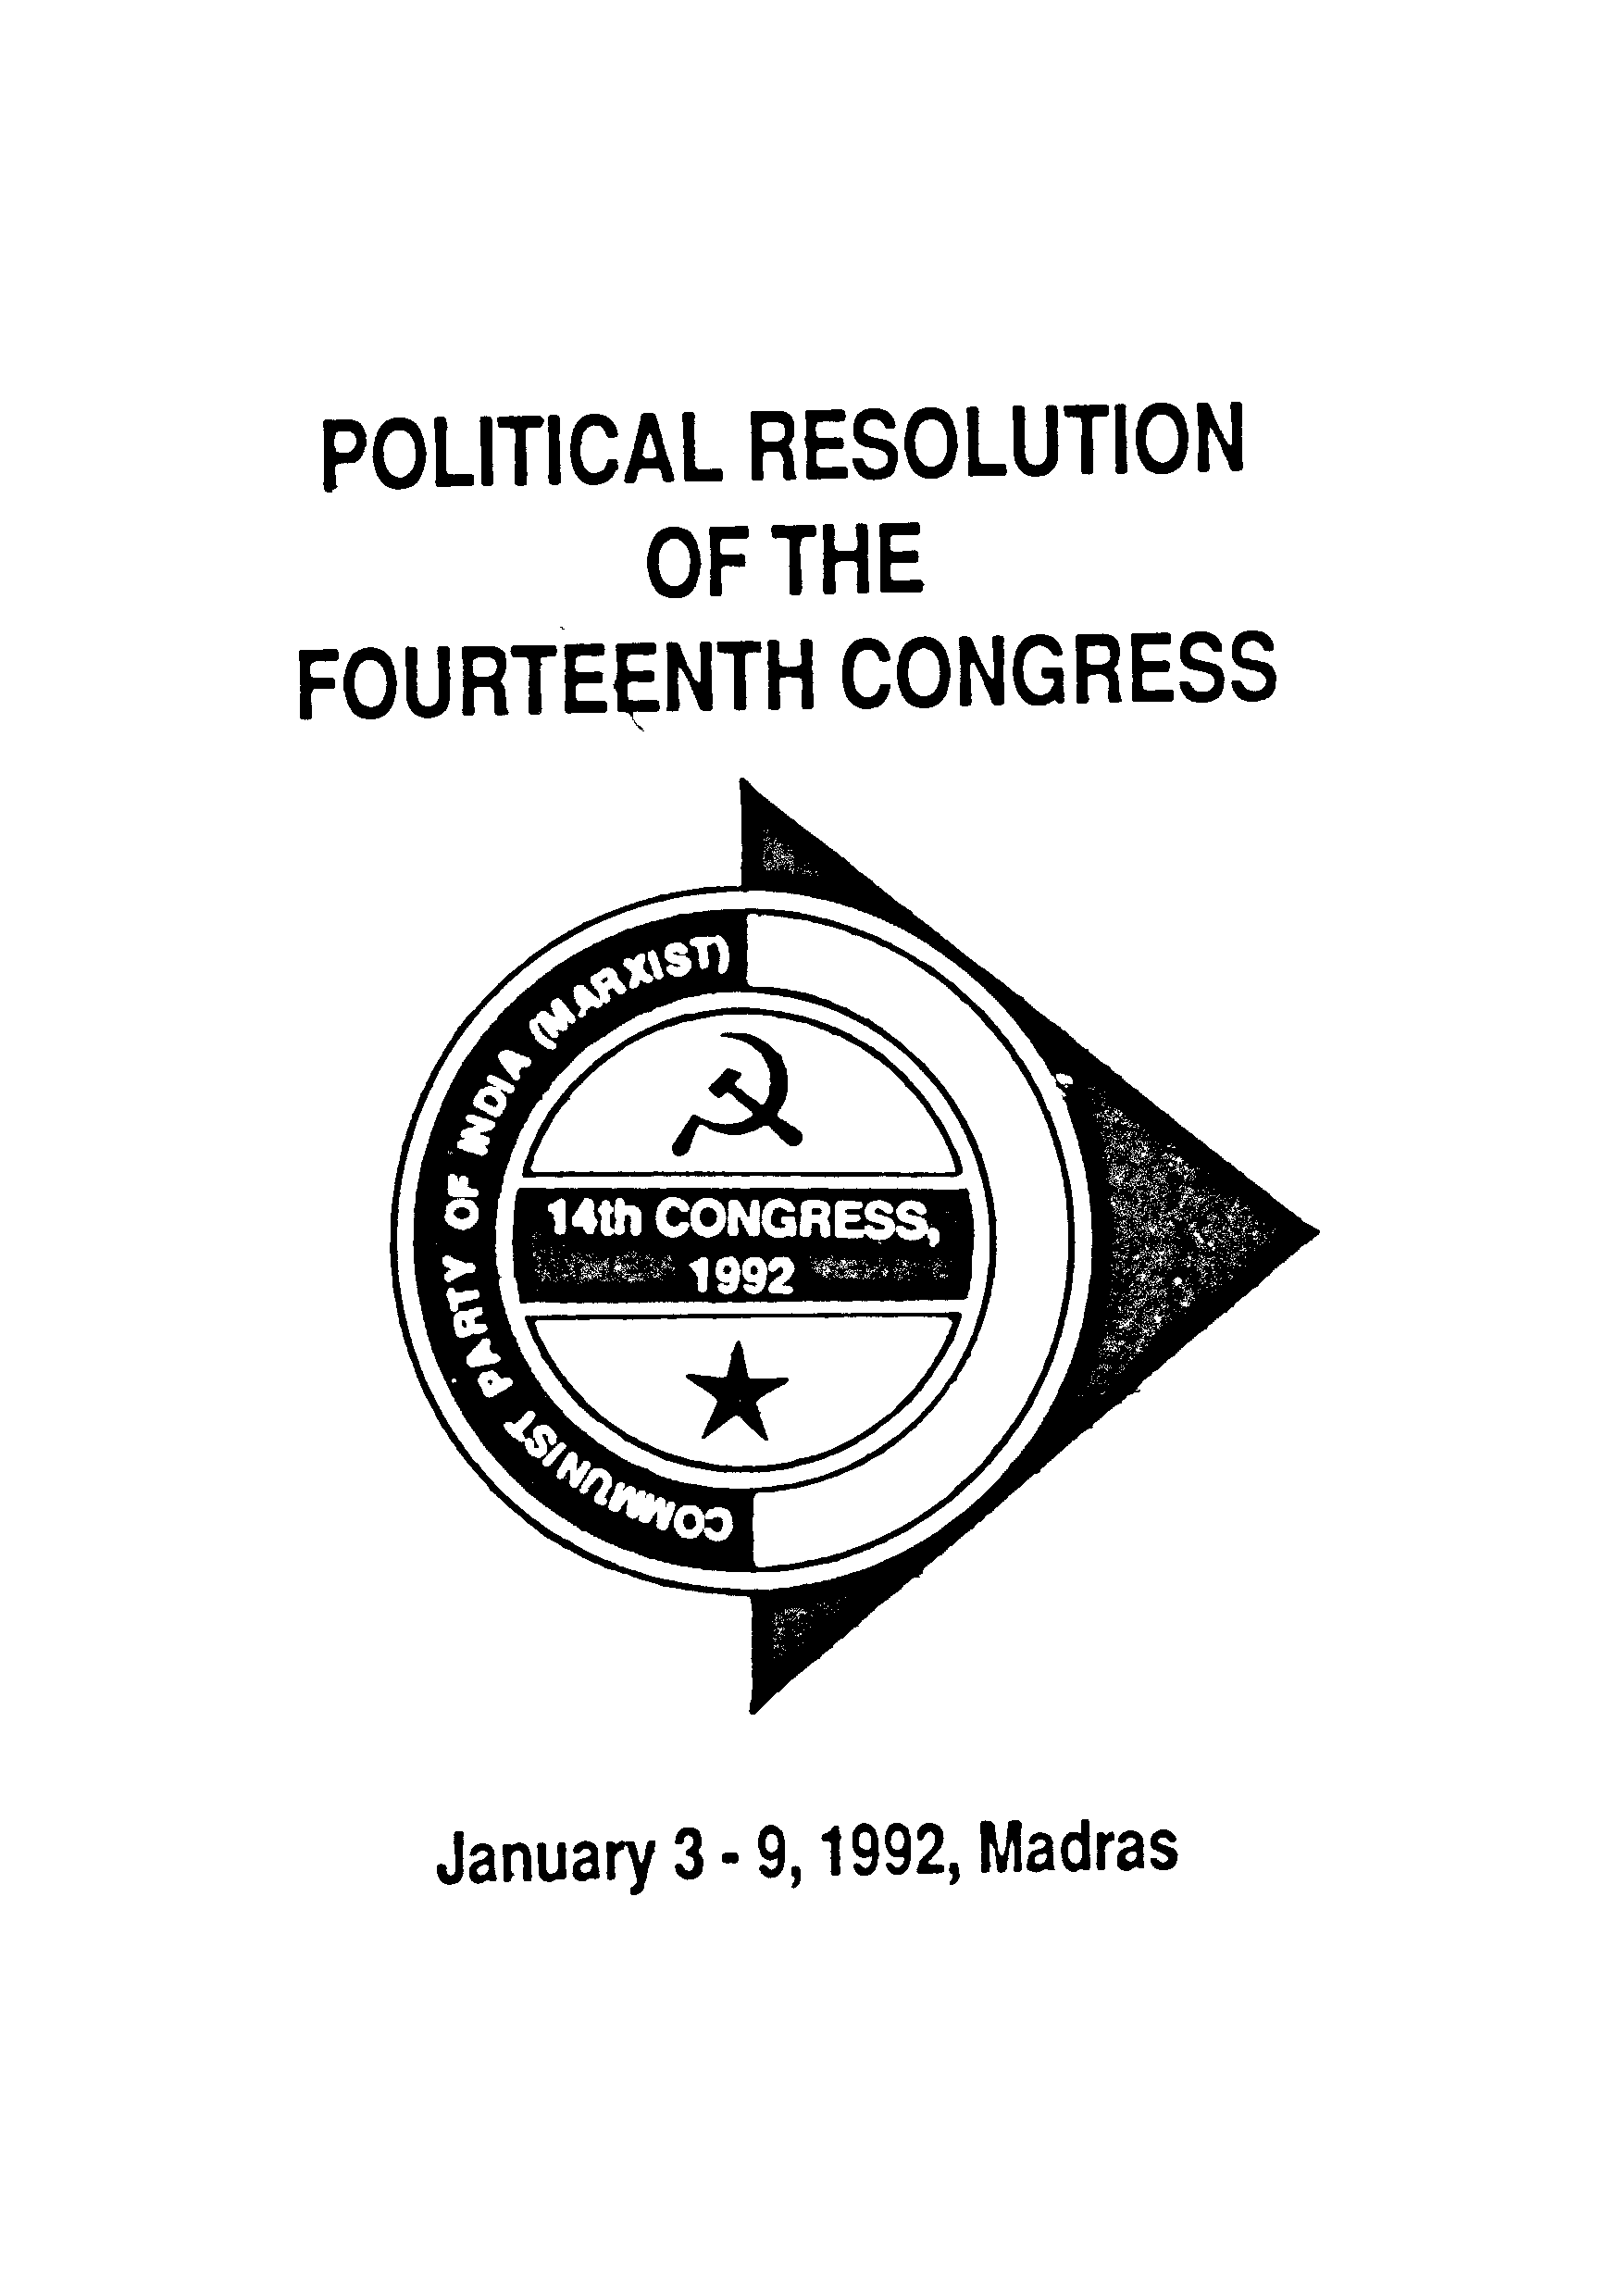 Political Resoution Of The Fourteenth Congress 14th 1992